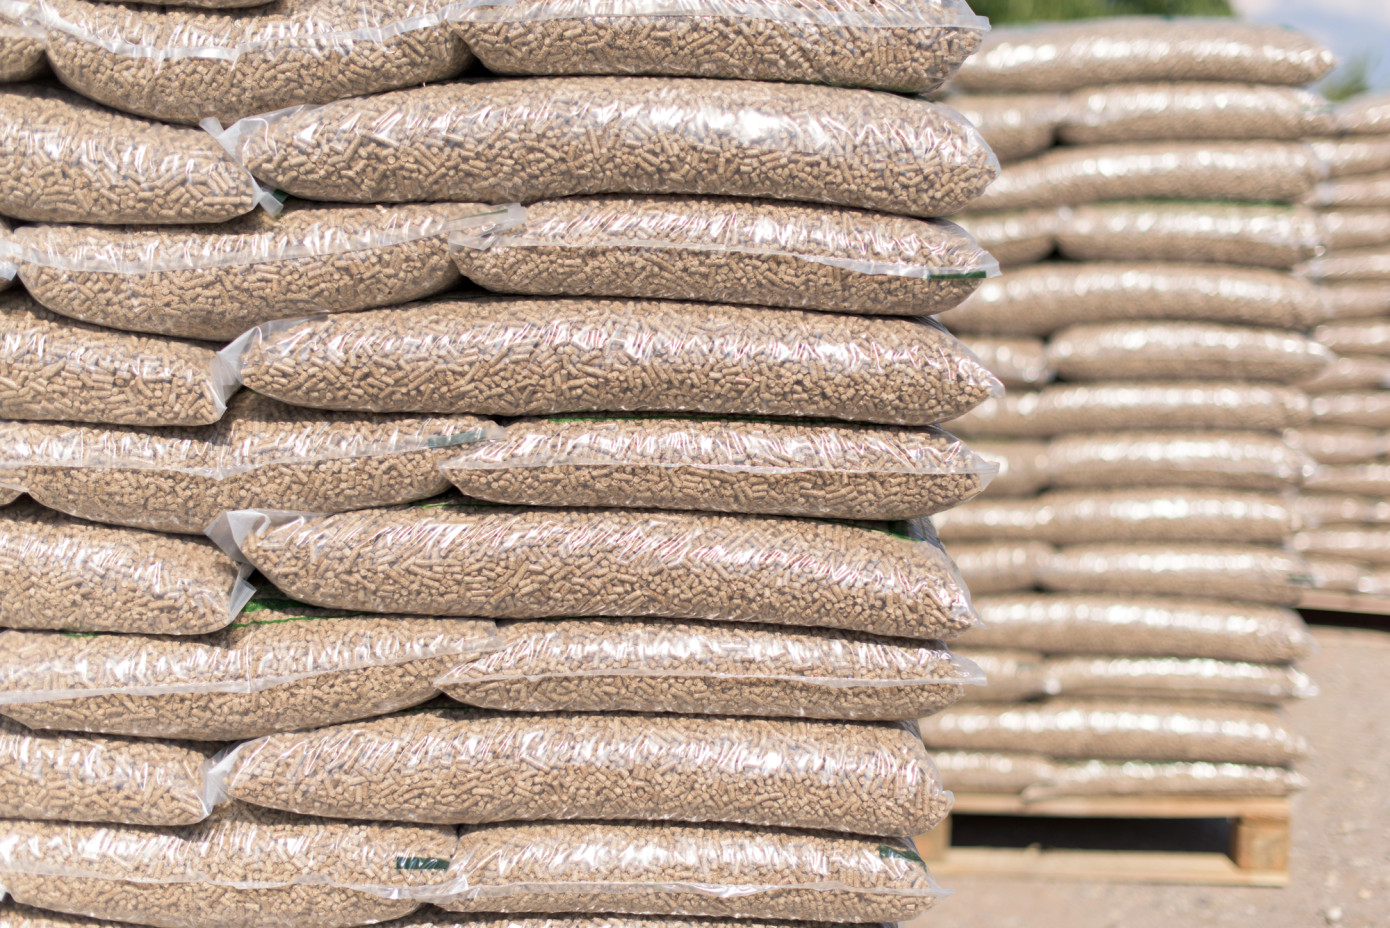 Japan"s wood pellet imports surge to record highs in 2023